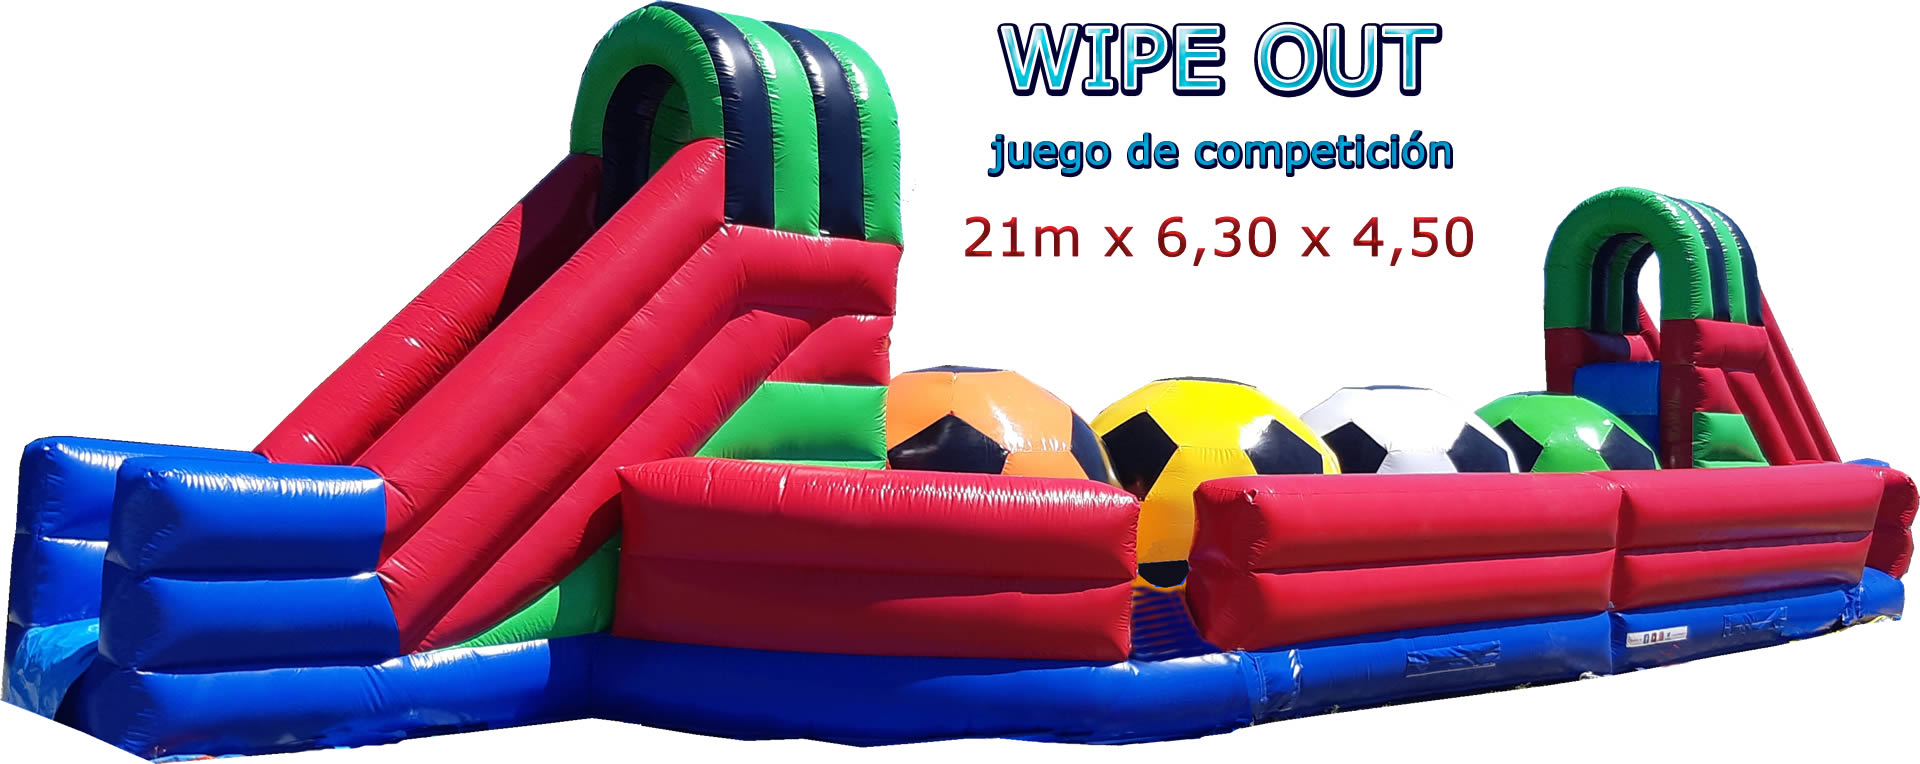 WIIPE OUT.Juego competicion 21 x6